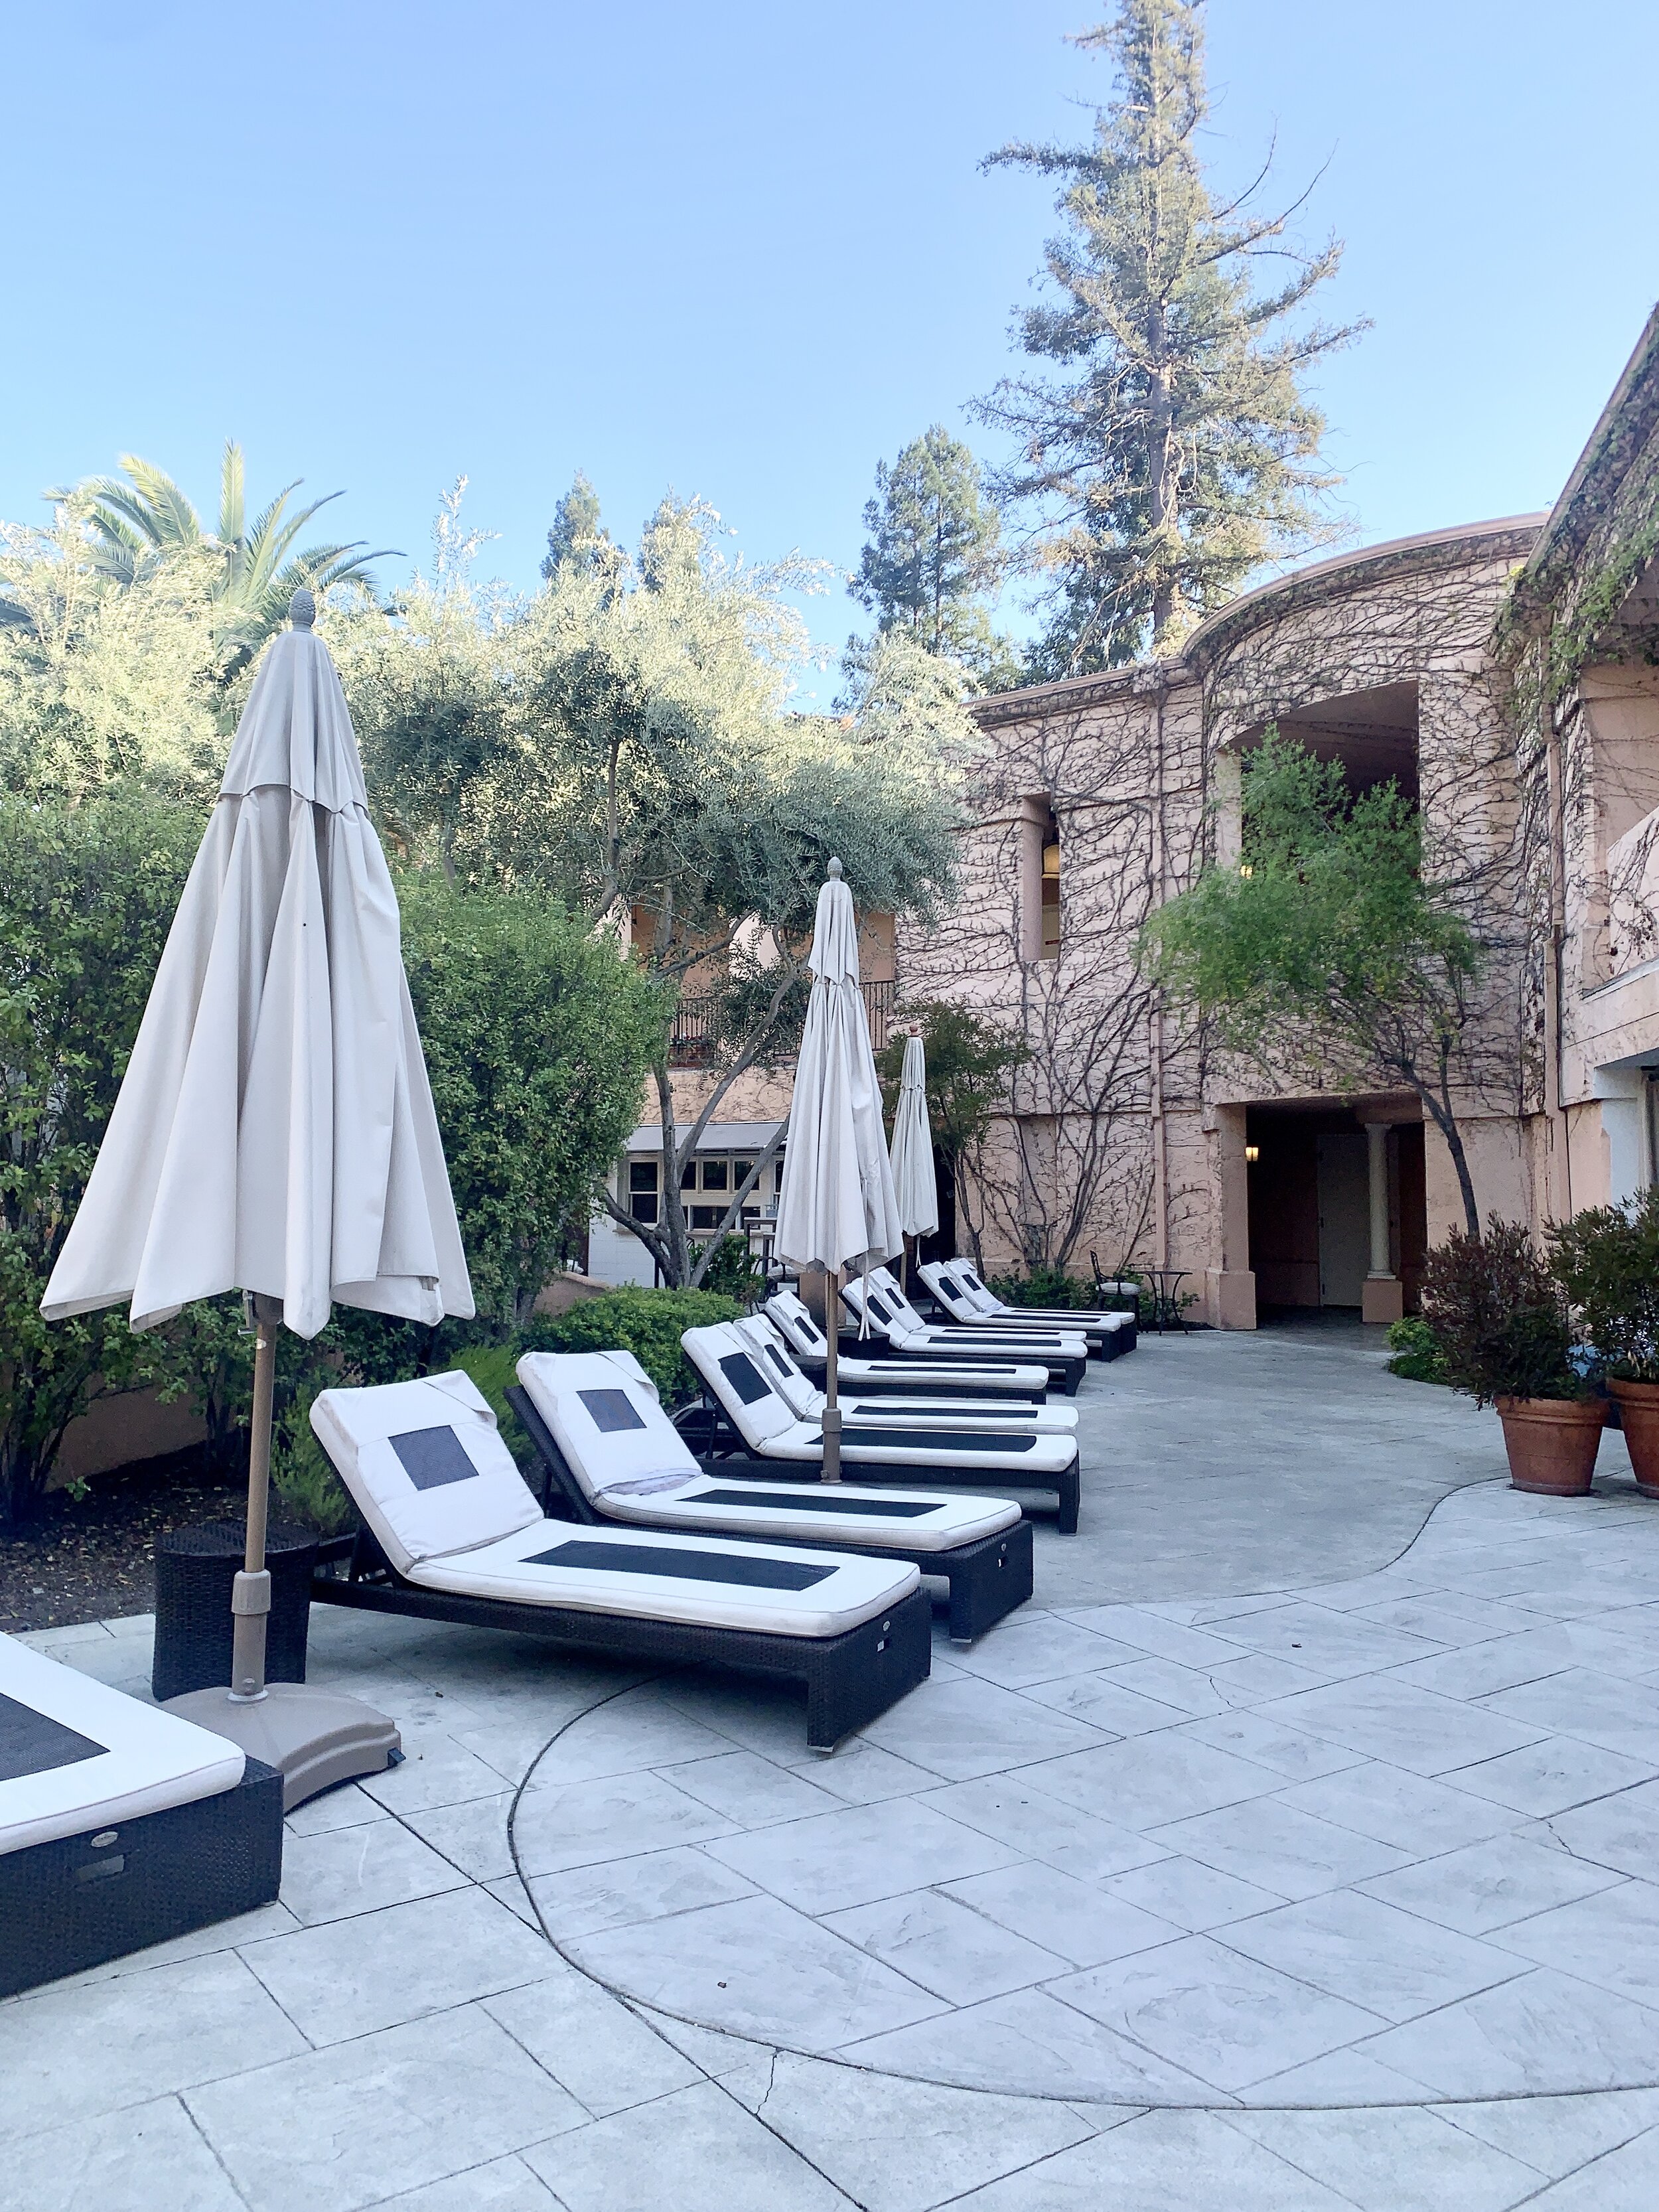 Fairmont Sonoma Mission Inn & Spa Review  - Spa at the fairmont sonoma mission inn.JPG